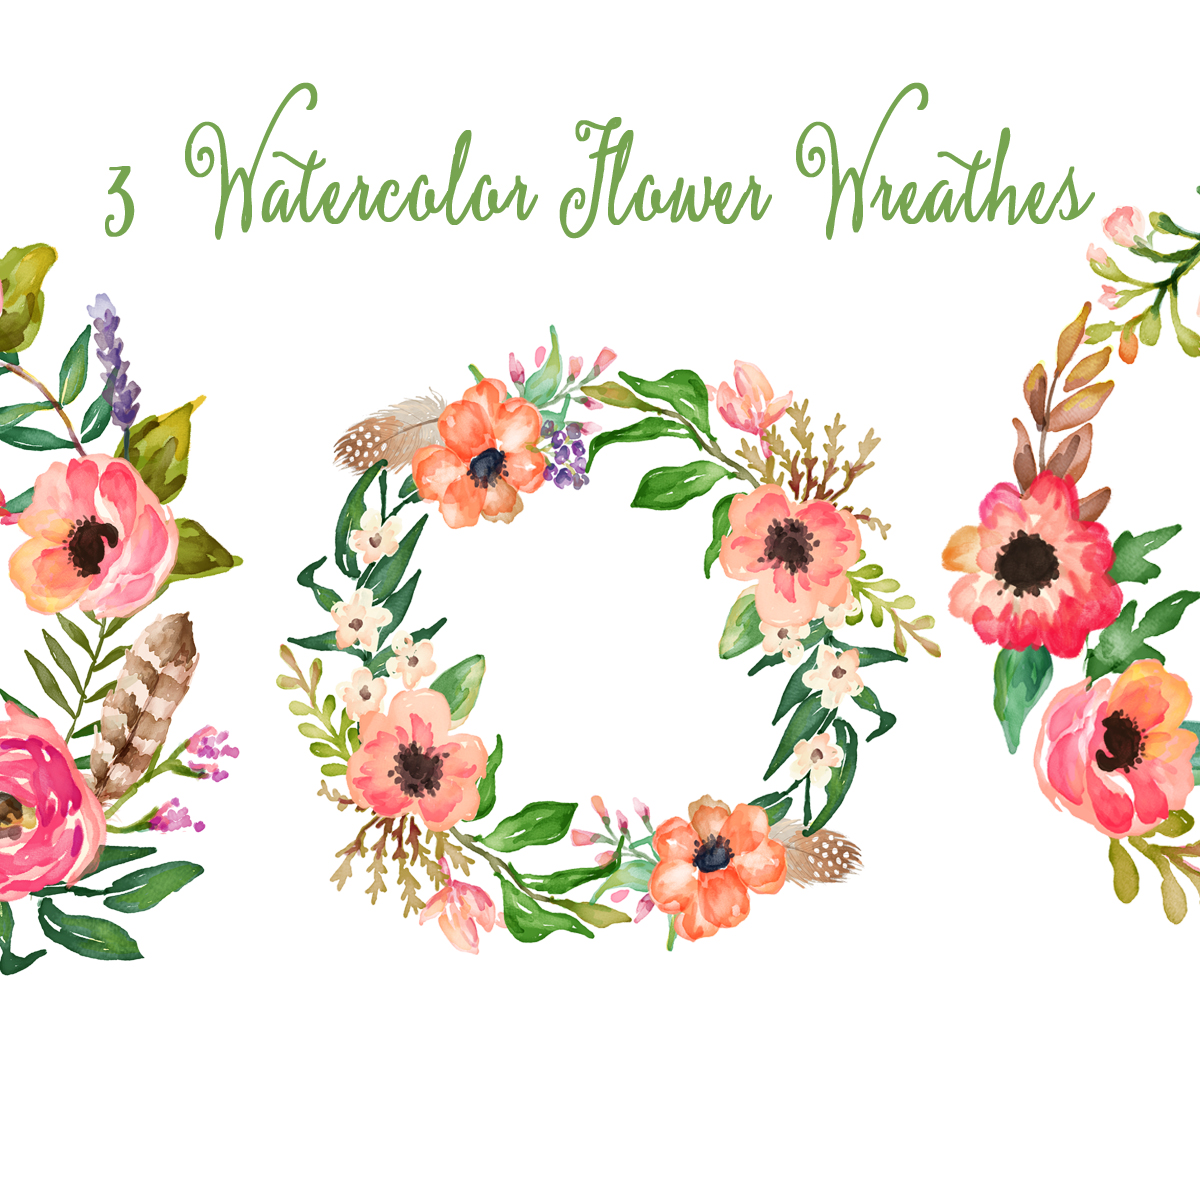 Watercolor hand painted floral frames clipart floral wreaths